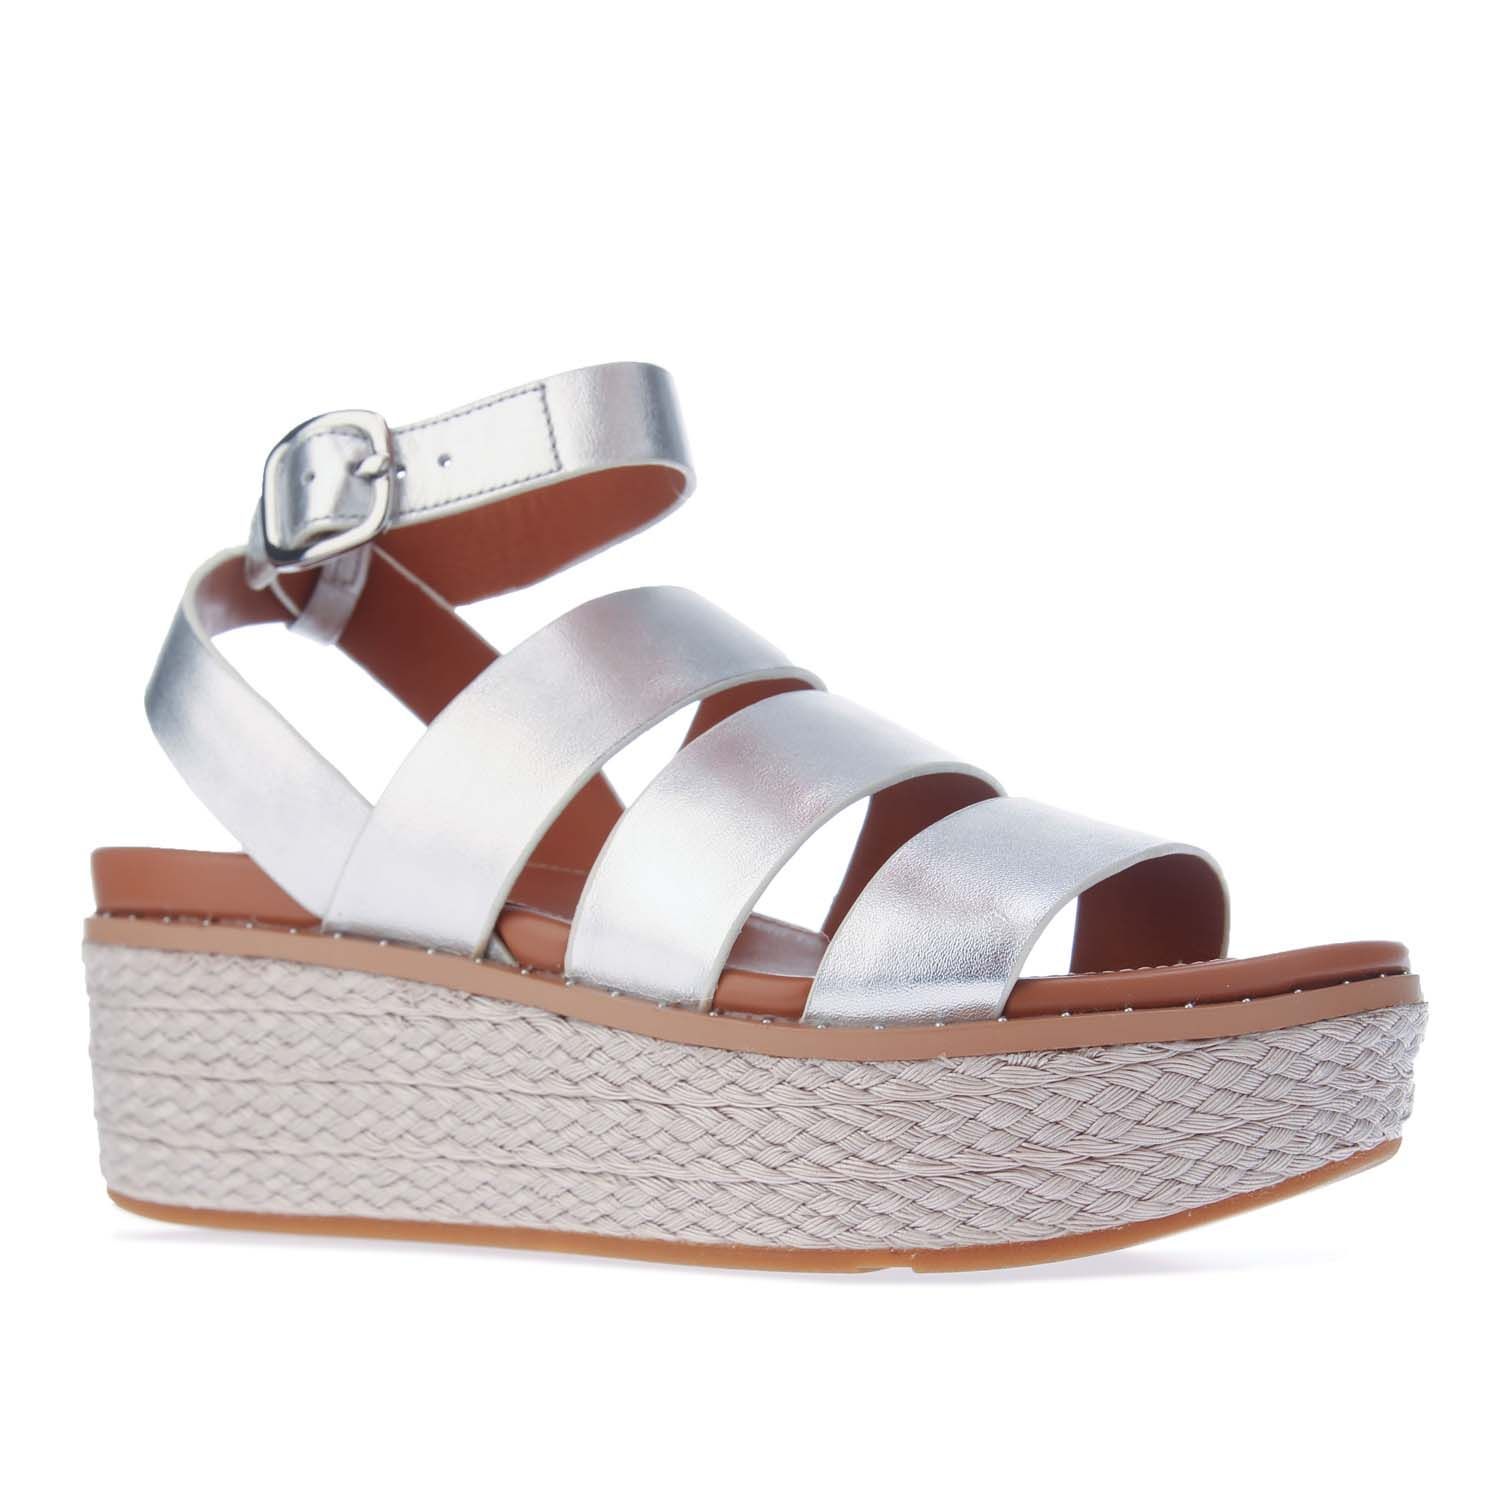 Women's Fitflop Eloise Back-Strap Espadrille Wedge Sandals in Silver